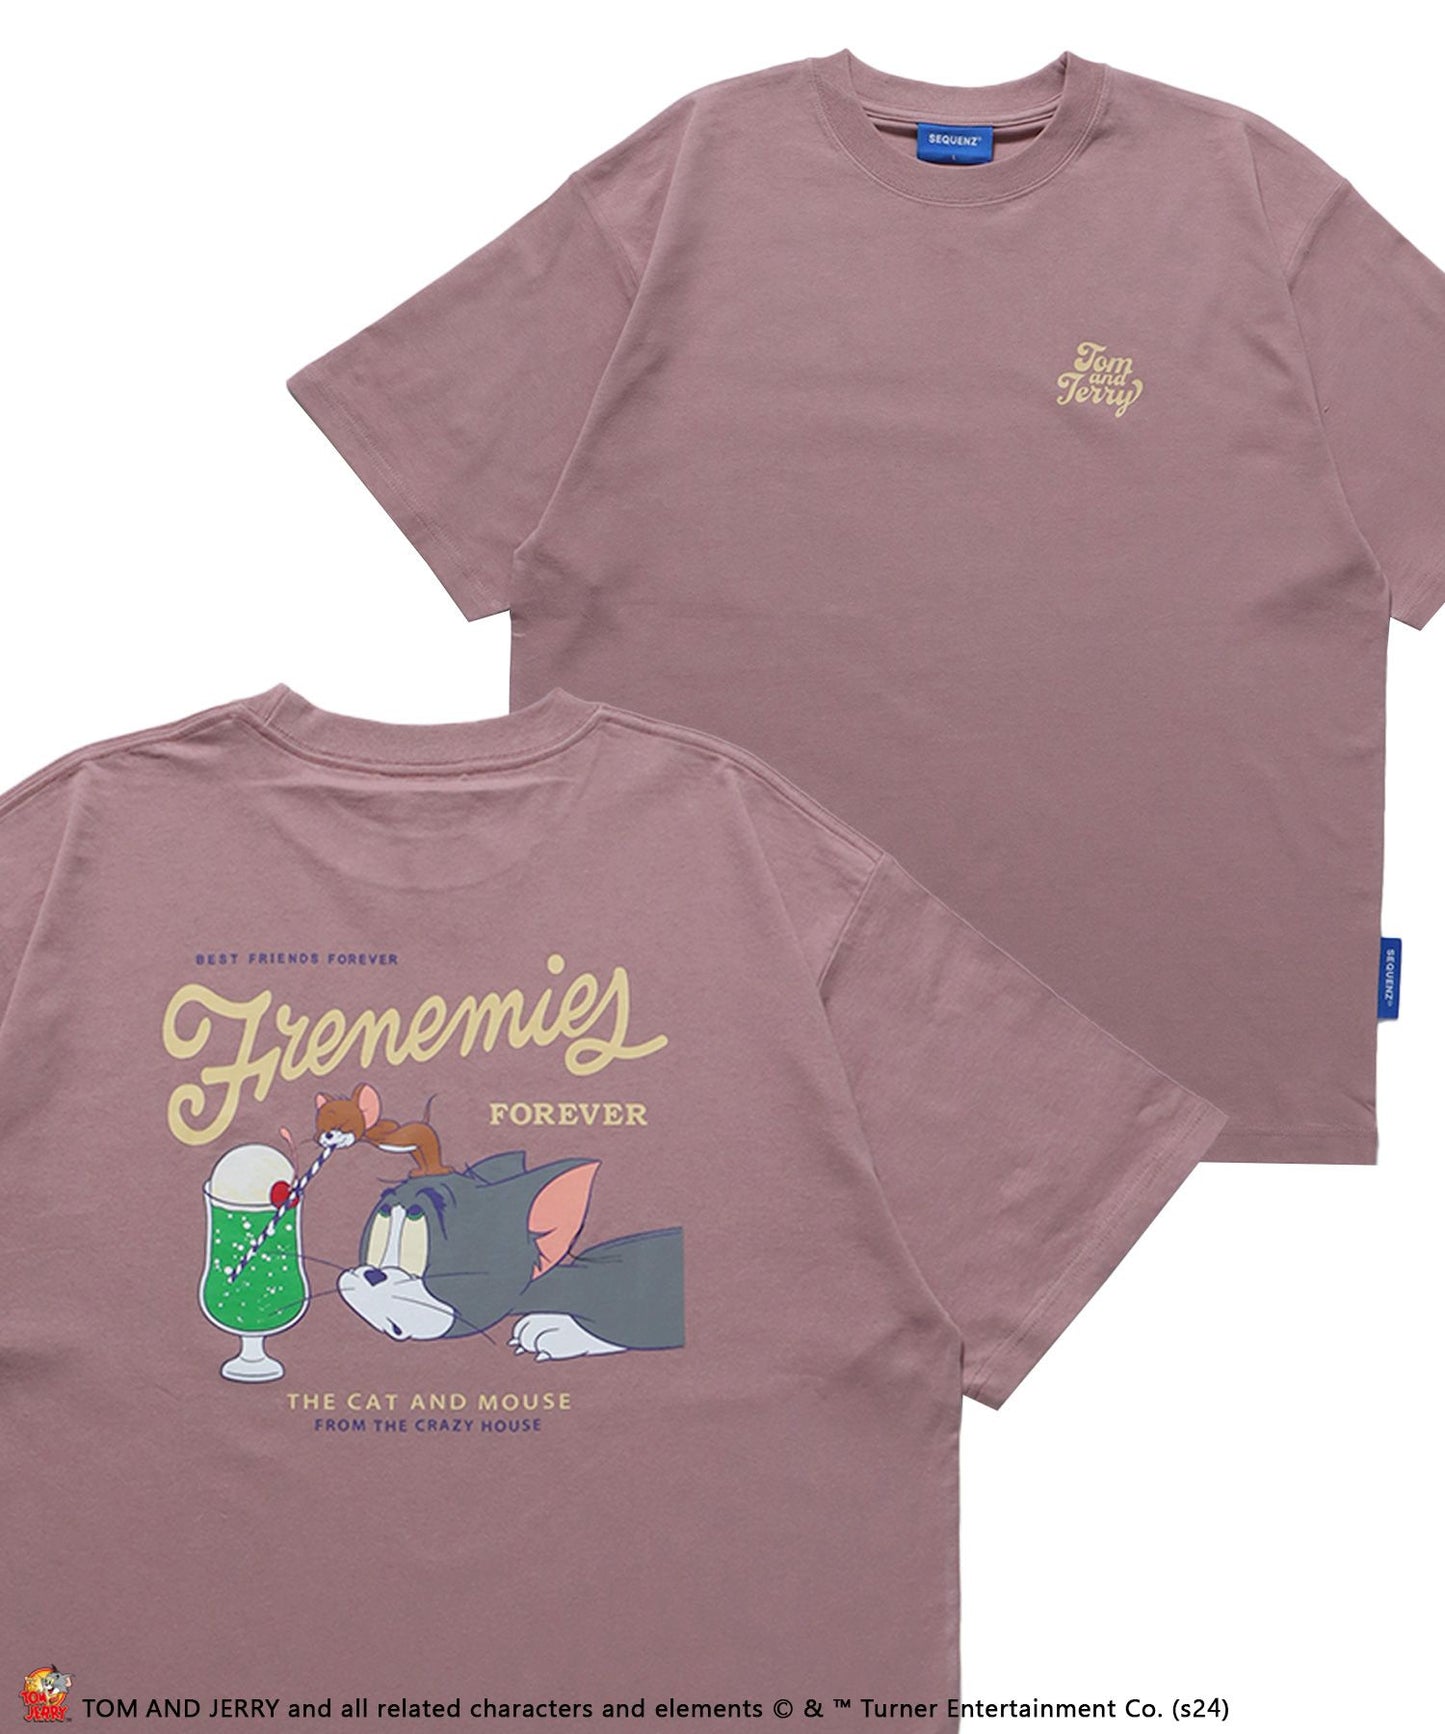 【SEQUENZ（シークエンズ）】TJ SANDWICH SHOP S/S TEE / TOM and JERRY トムジェリ アメリカンダイナー Tシャツ レトロ クリームソーダ プリント 半袖 ピンク